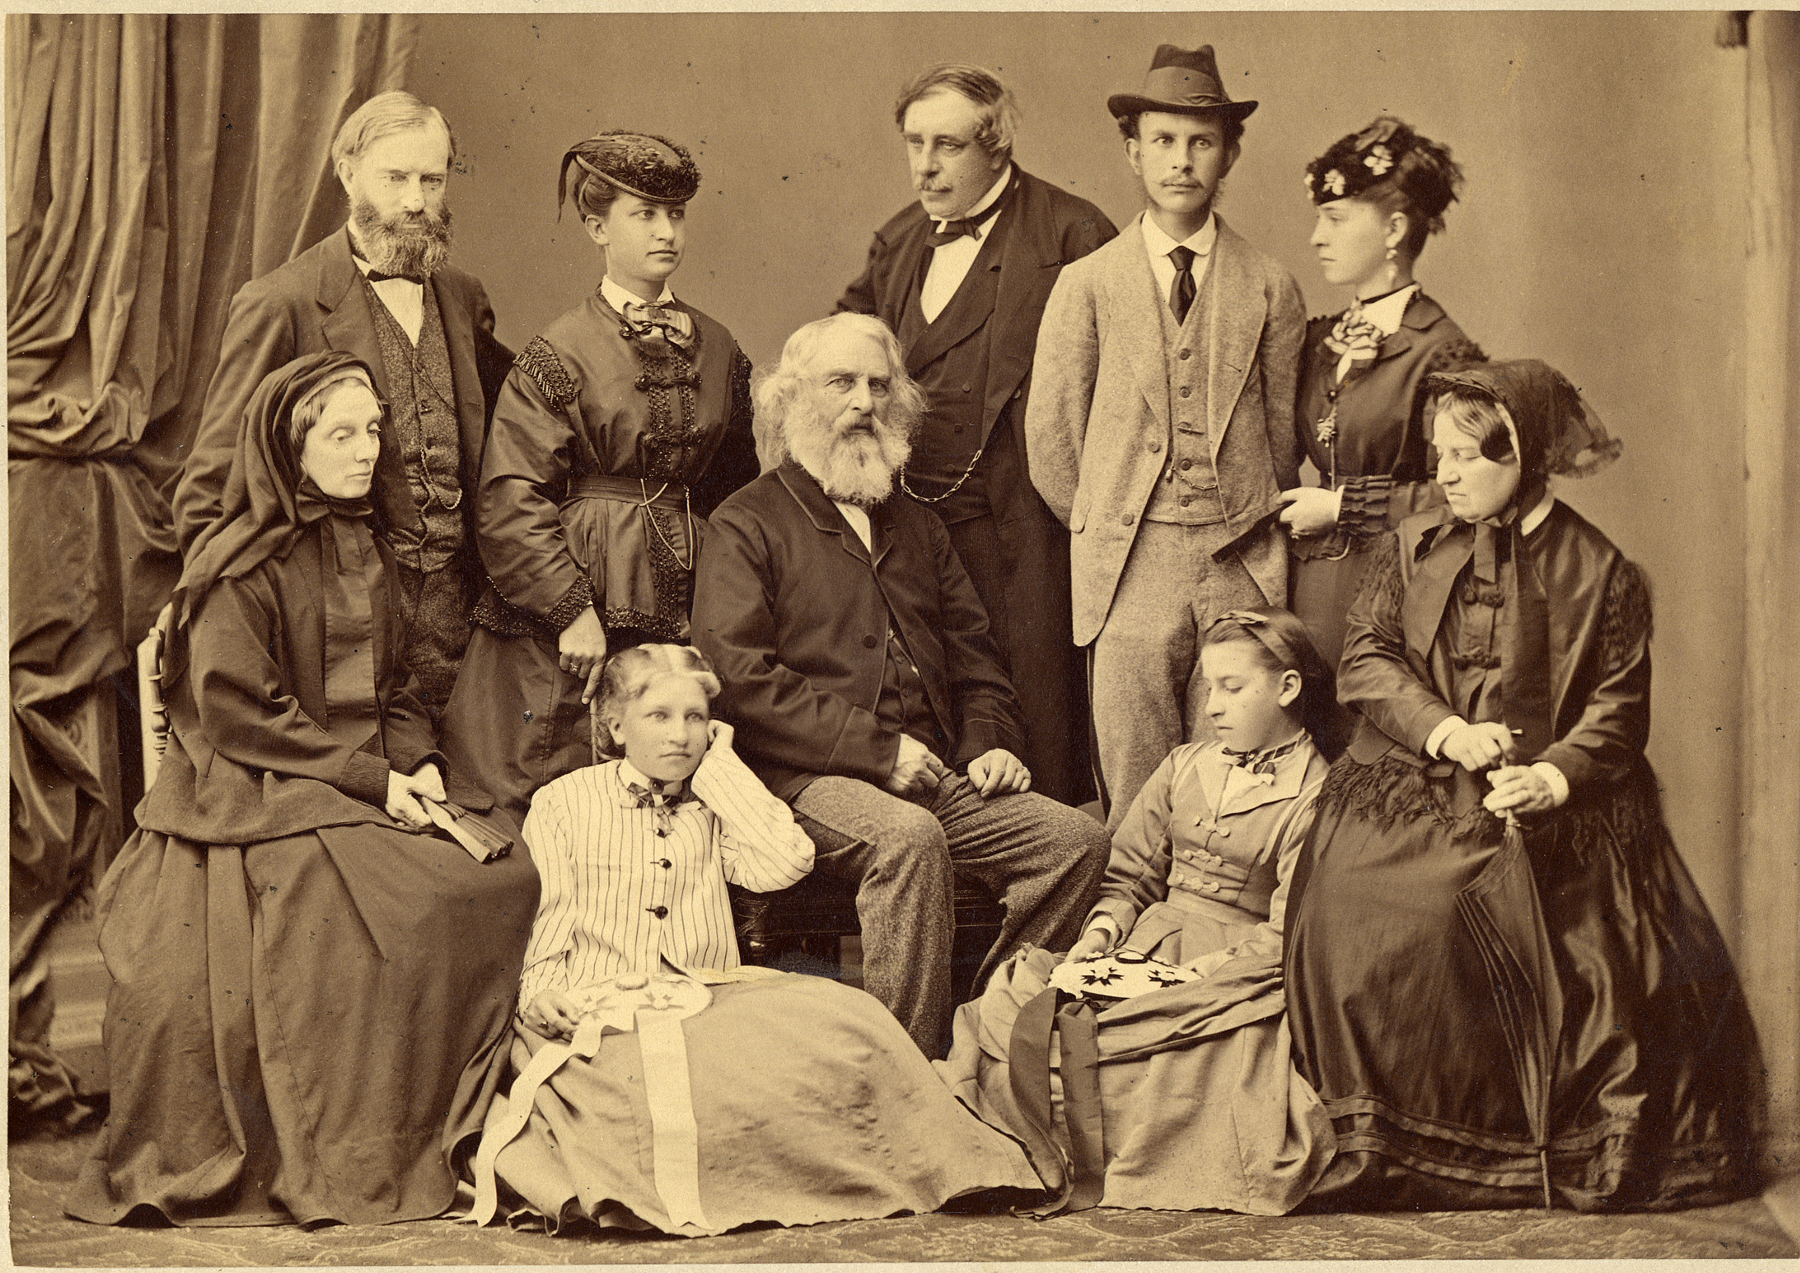 Sepia tone photograph of Longfellow family in photographer's studio. Three men and two women stand in back row. Henry Longfellow seated at chair in center. Two older women sit in chairs at left and right, two teenage girls sit on floor.